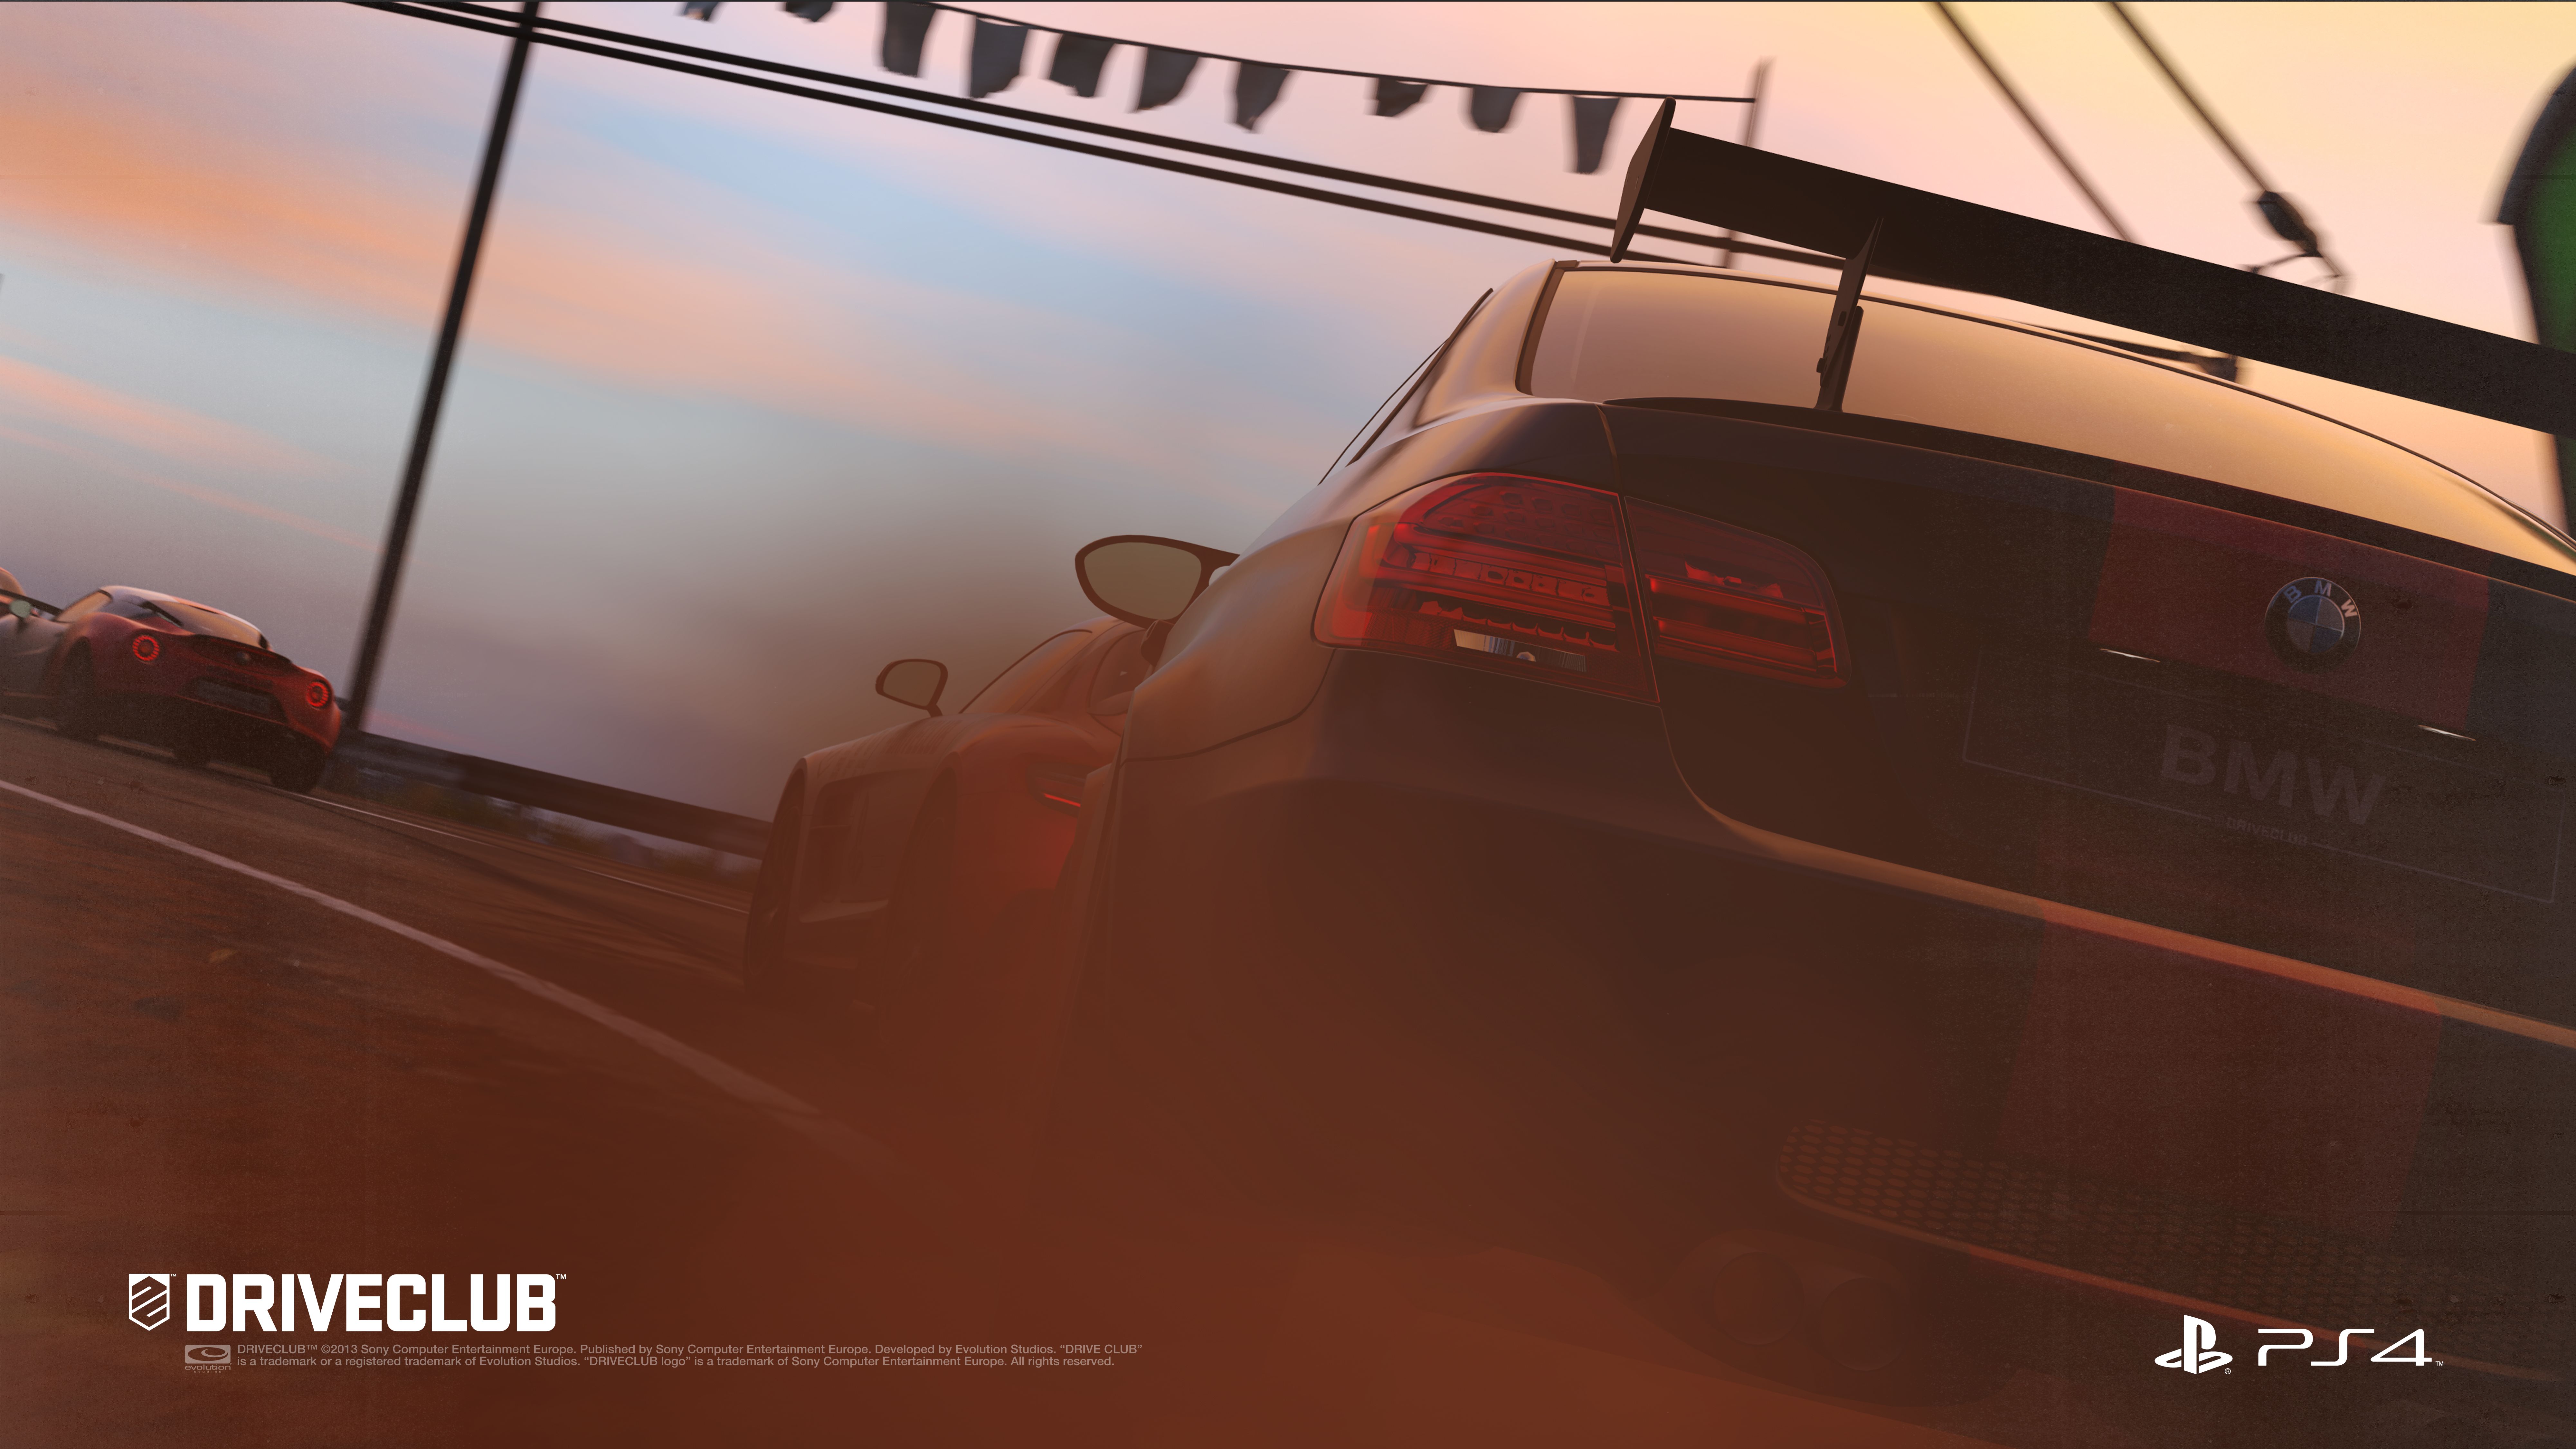 driveclub review image 3